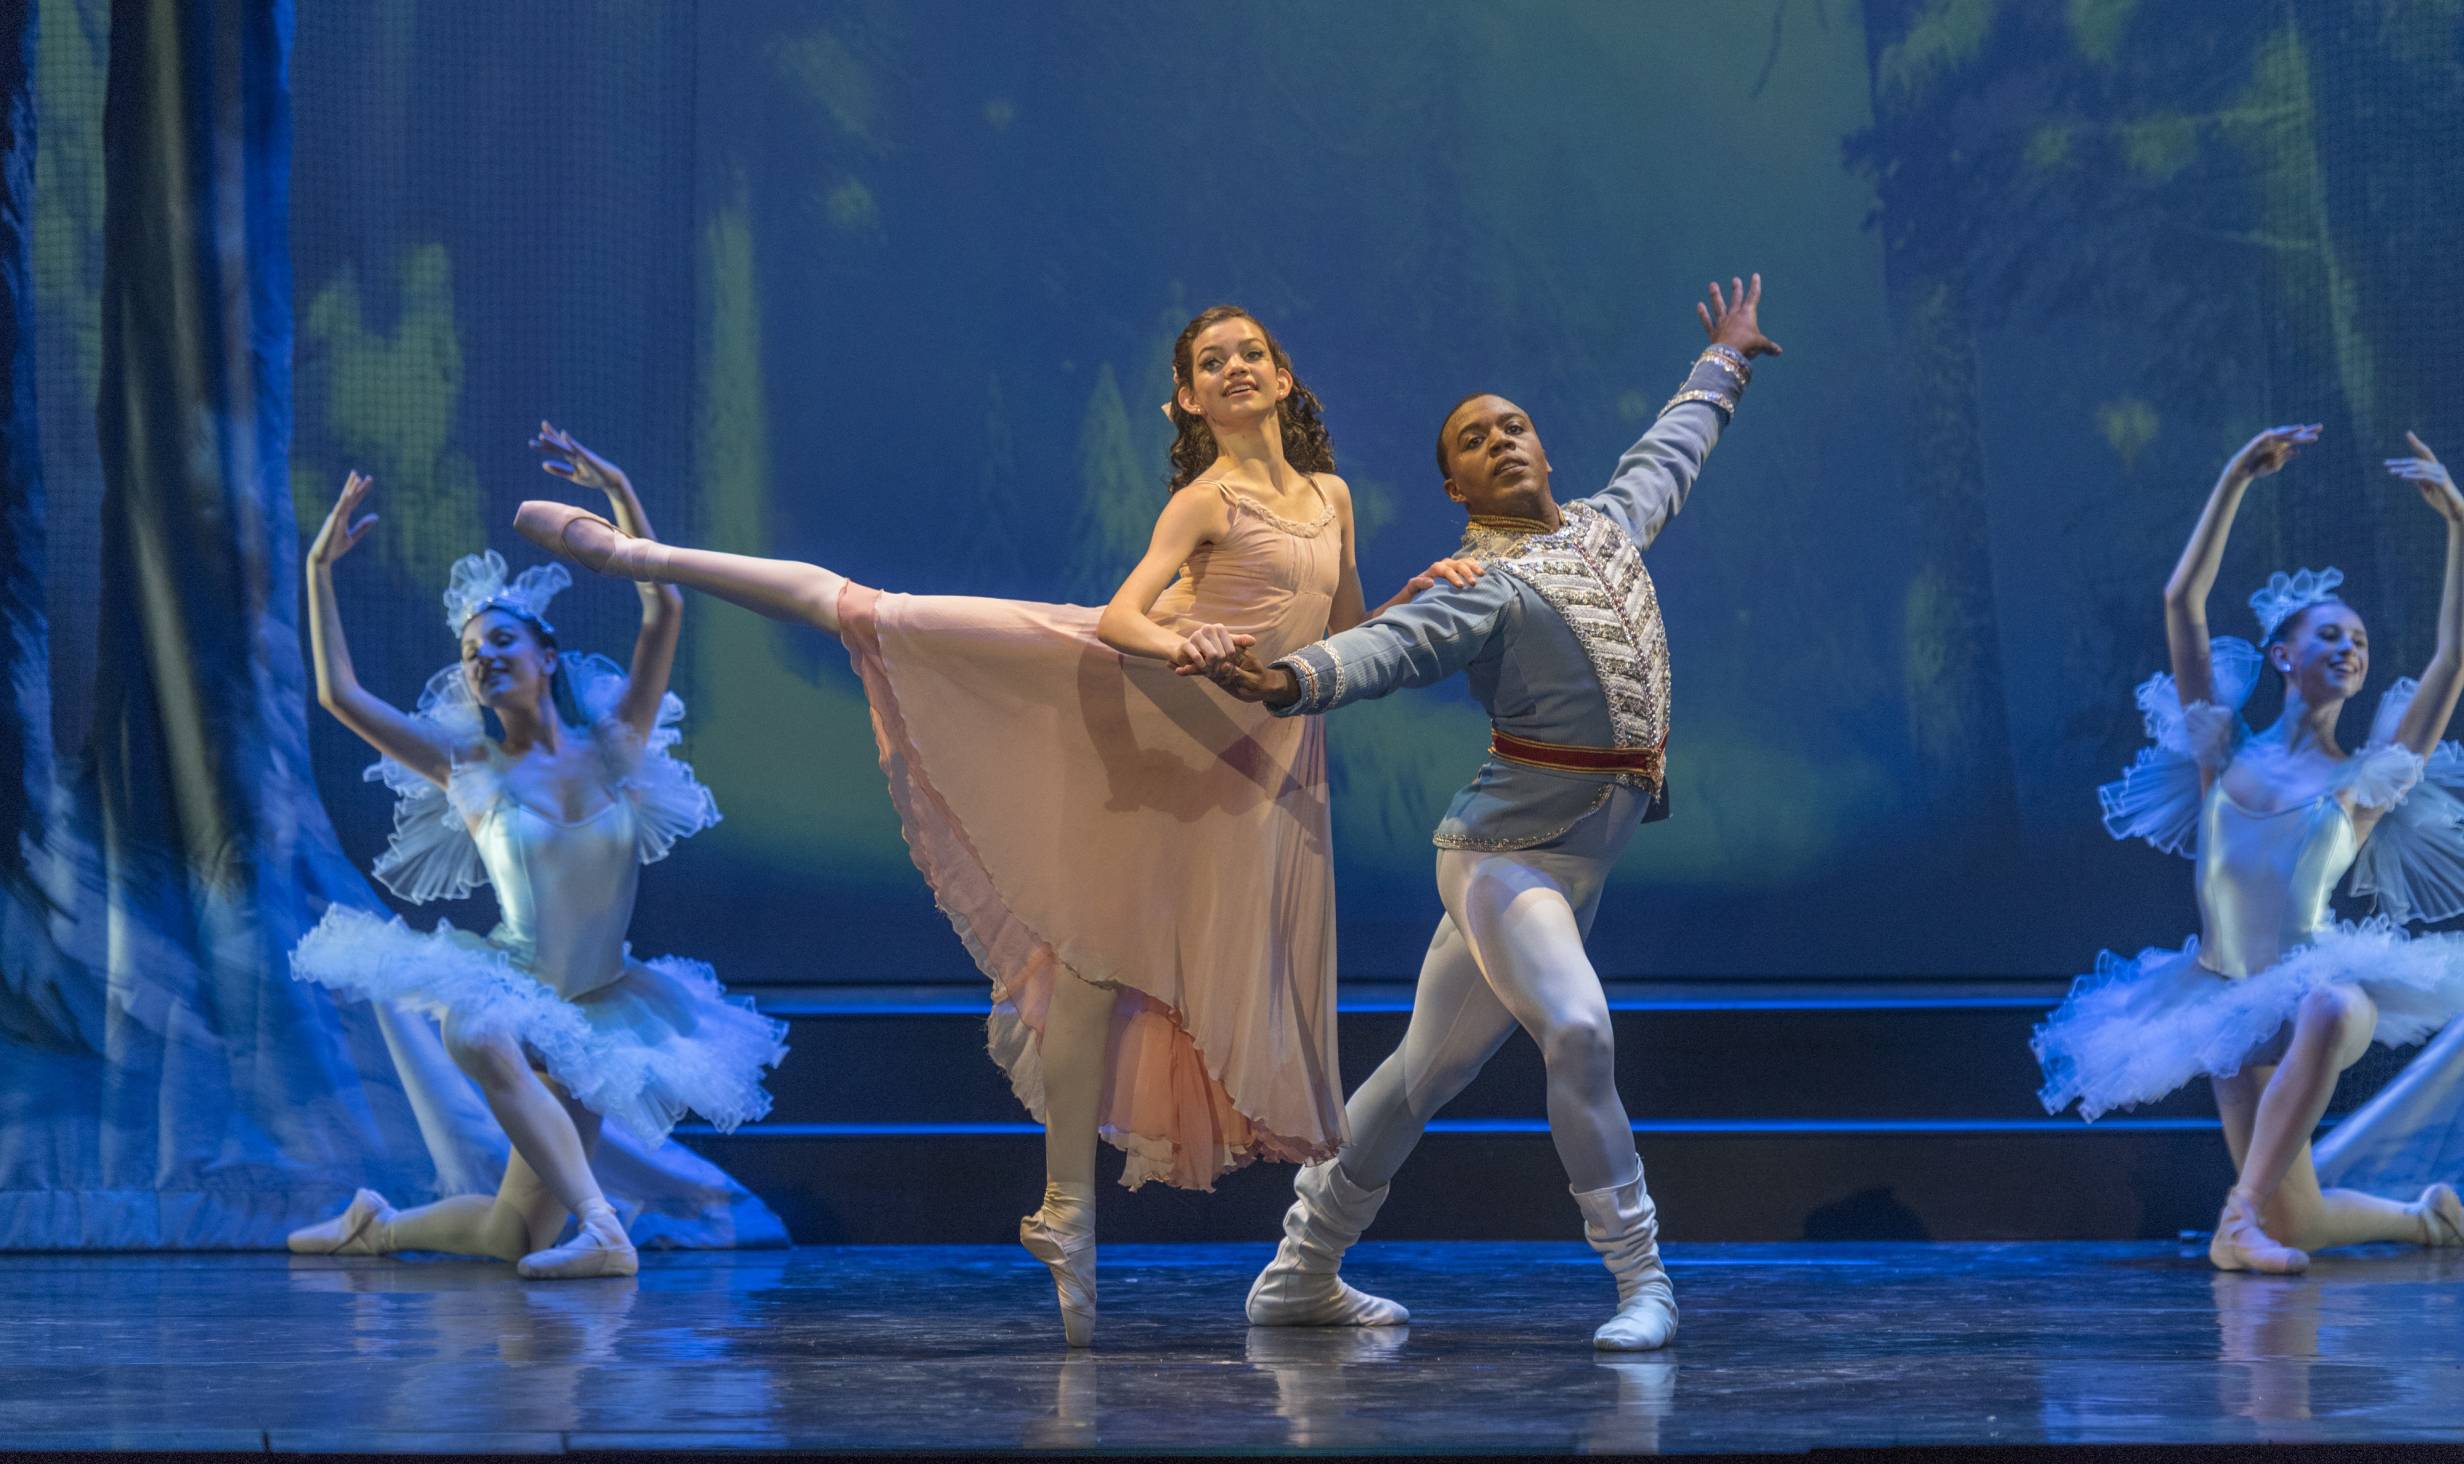 Twirl into the holidays with The Nutcracker